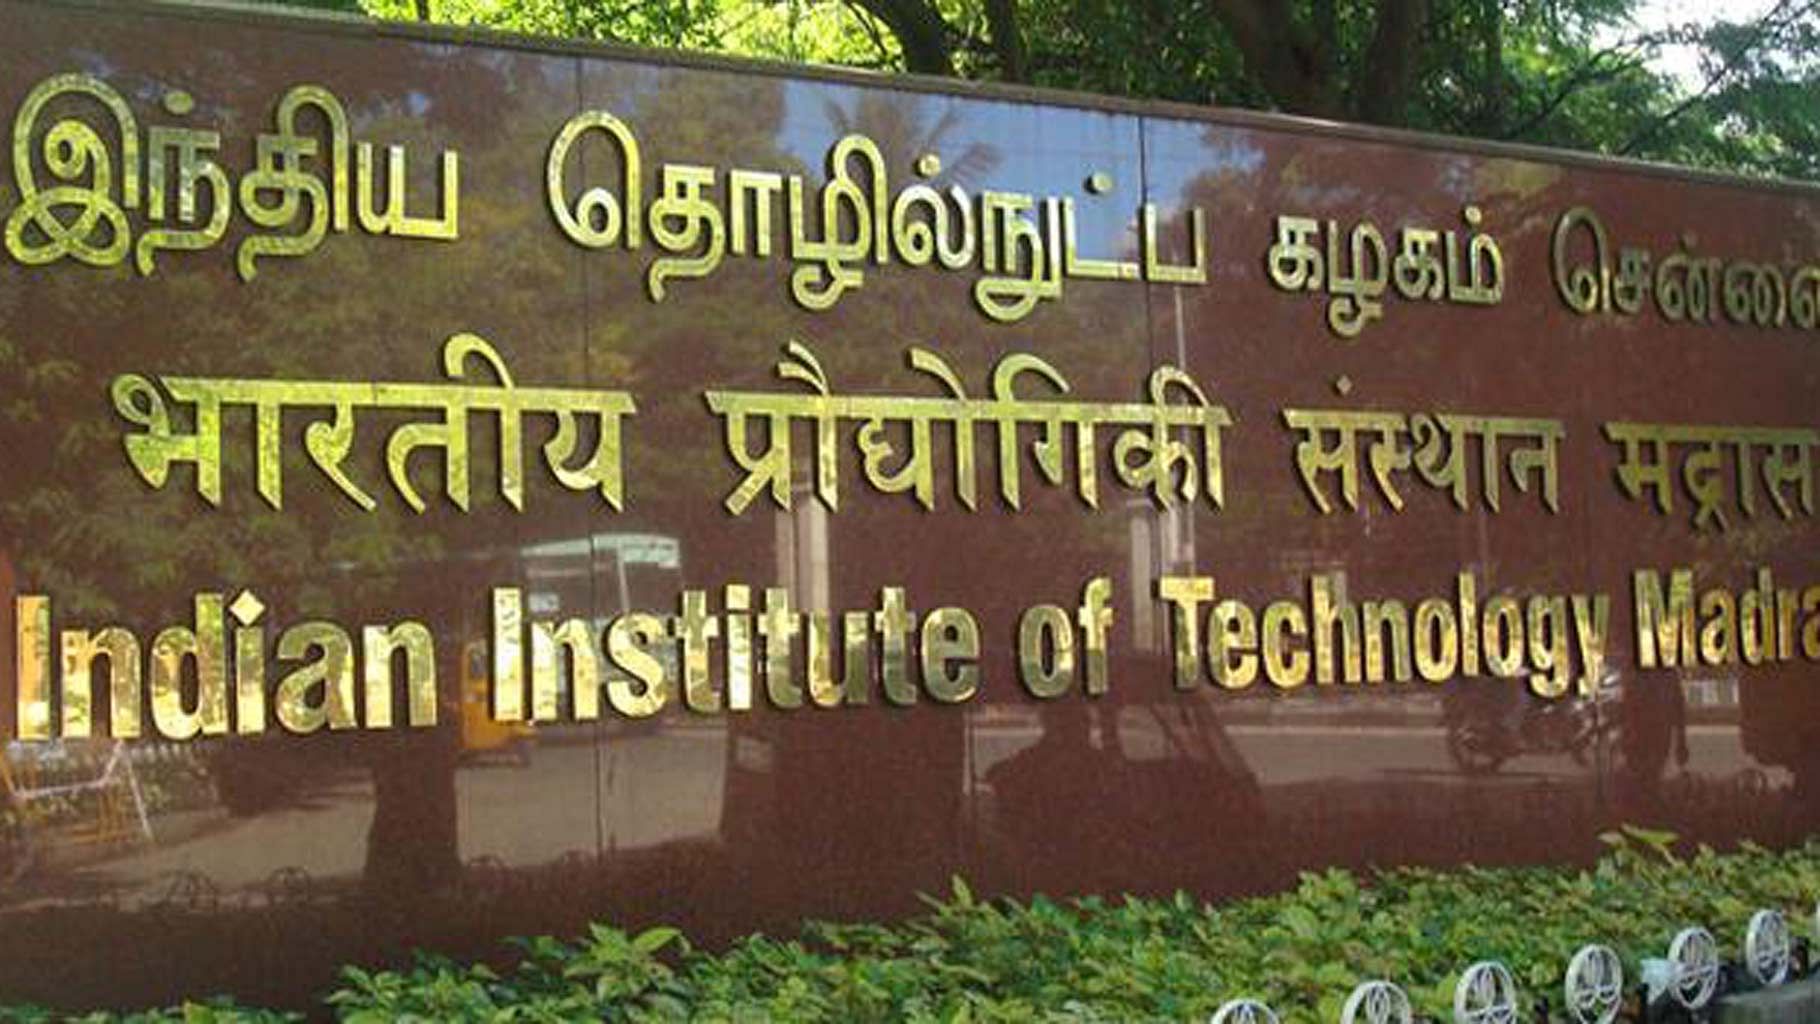 Indian Institute of Technology Madras. (Photo courtesy: <a href="https://www.iitm.ac.in/">IIT M</a>)